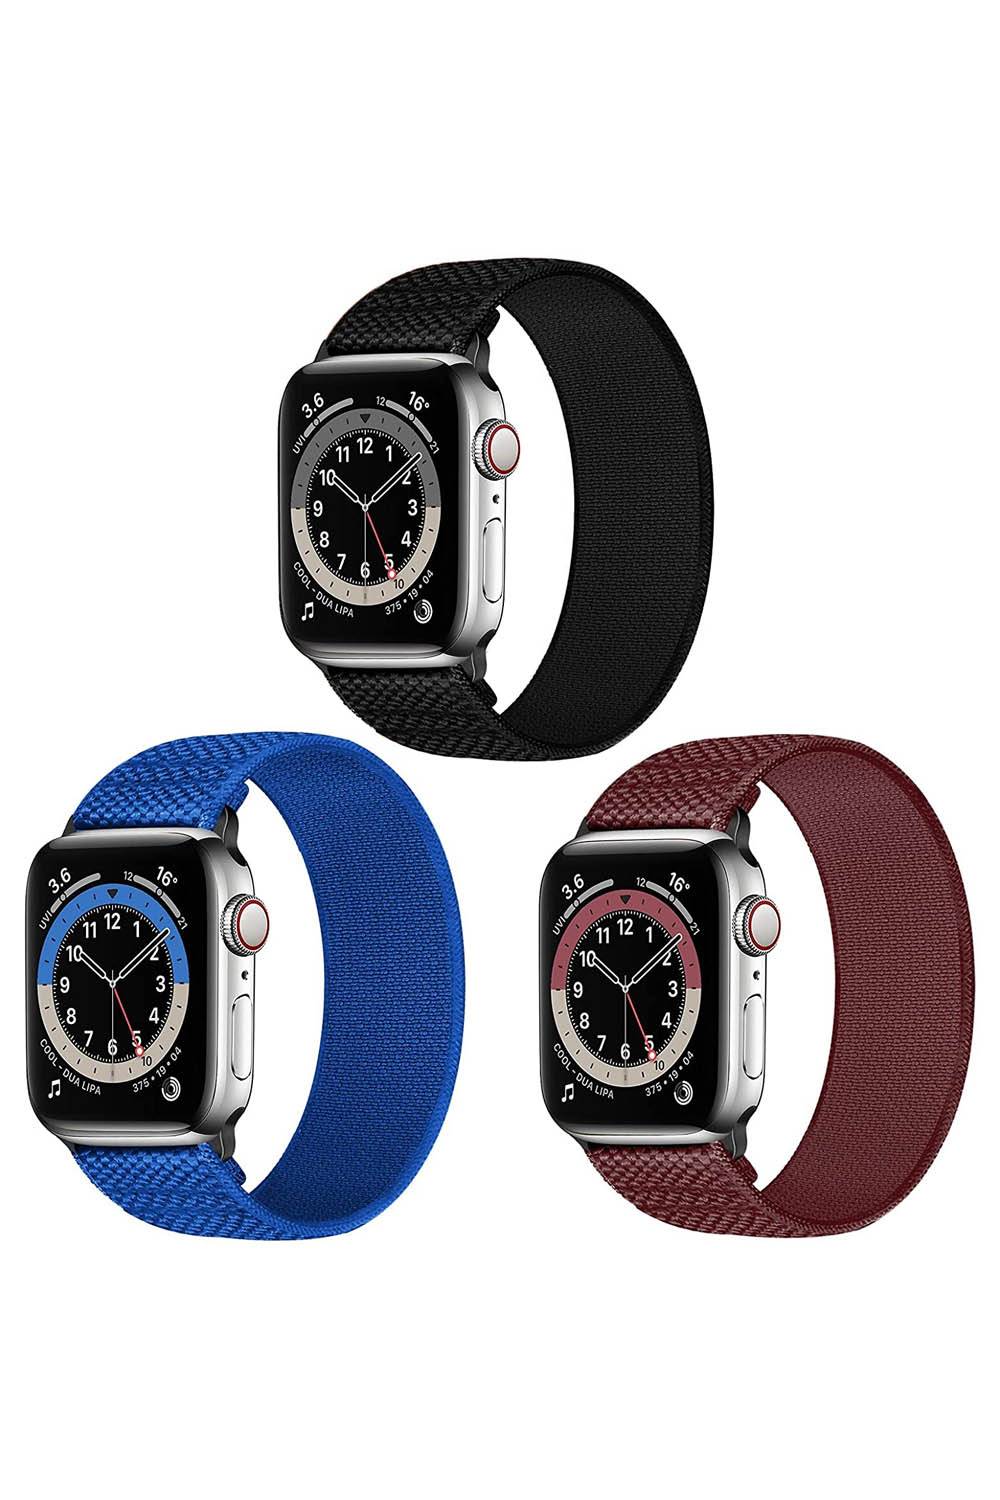 ychdder ethical apple watch band